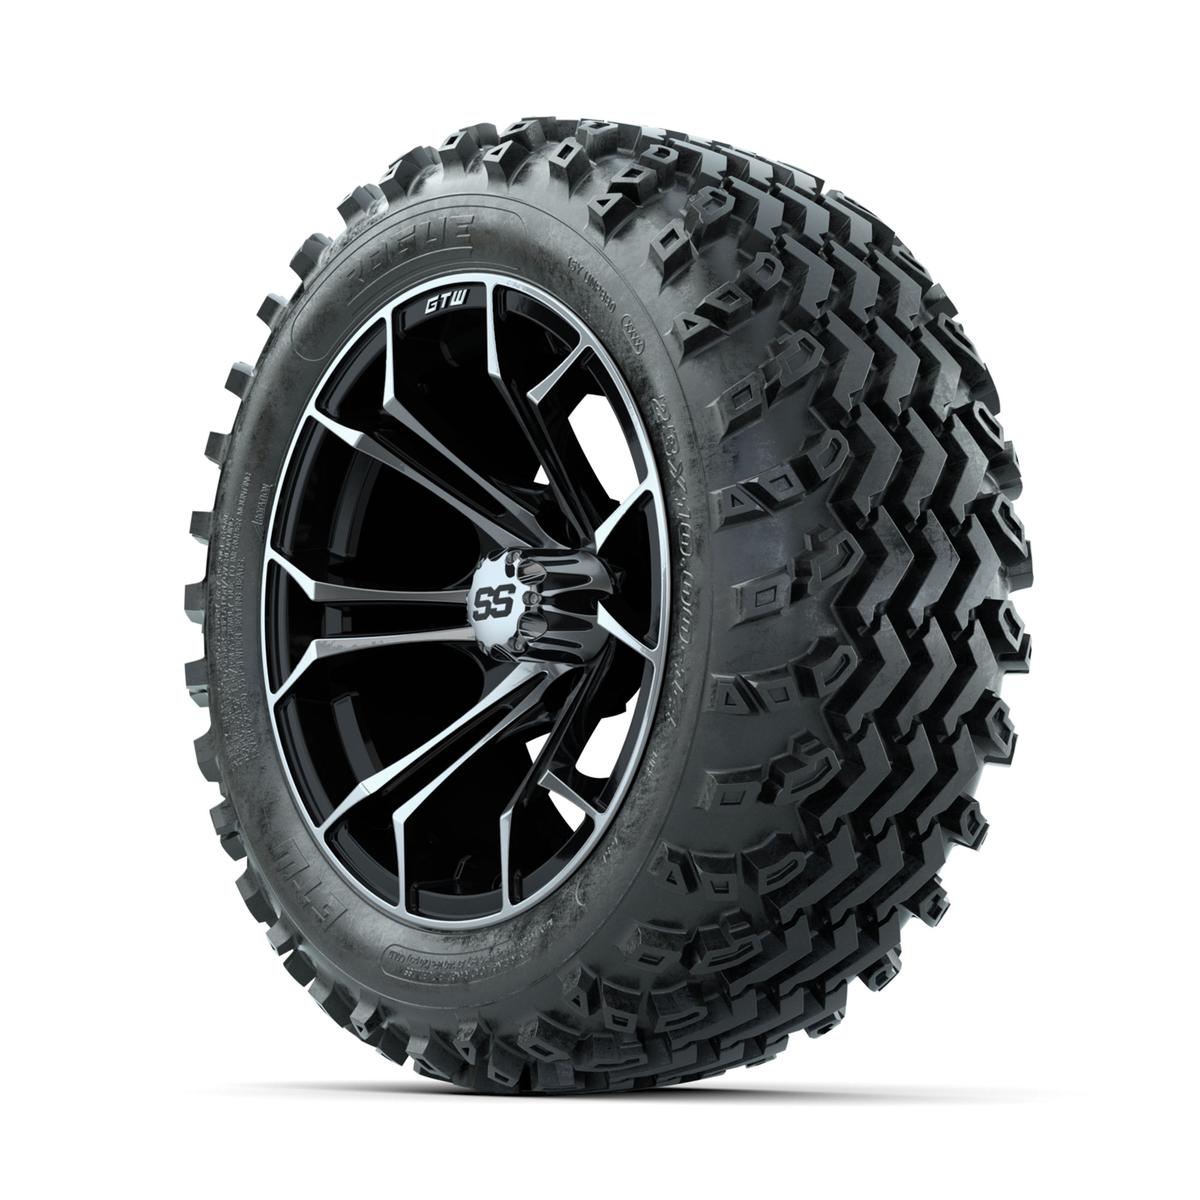 GTW Spyder Machined/Black 14 in Wheels with 23x10.00-14 Rogue All Terrain Tires – Full Set